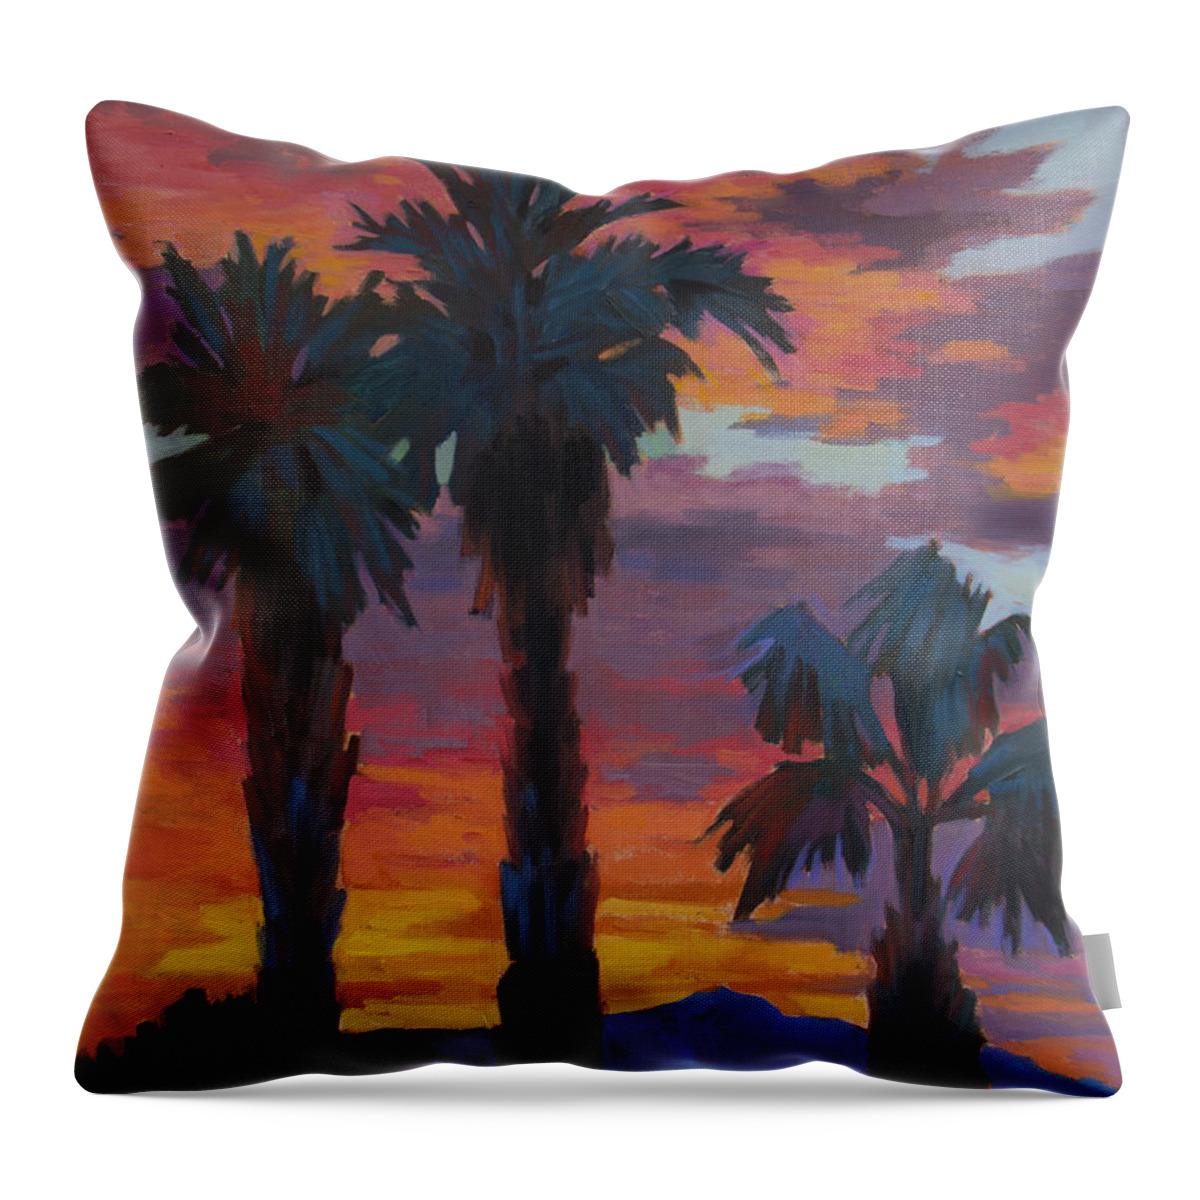 Casa Tecate Throw Pillow featuring the painting Casa Tecate Sunrise 2 by Diane McClary